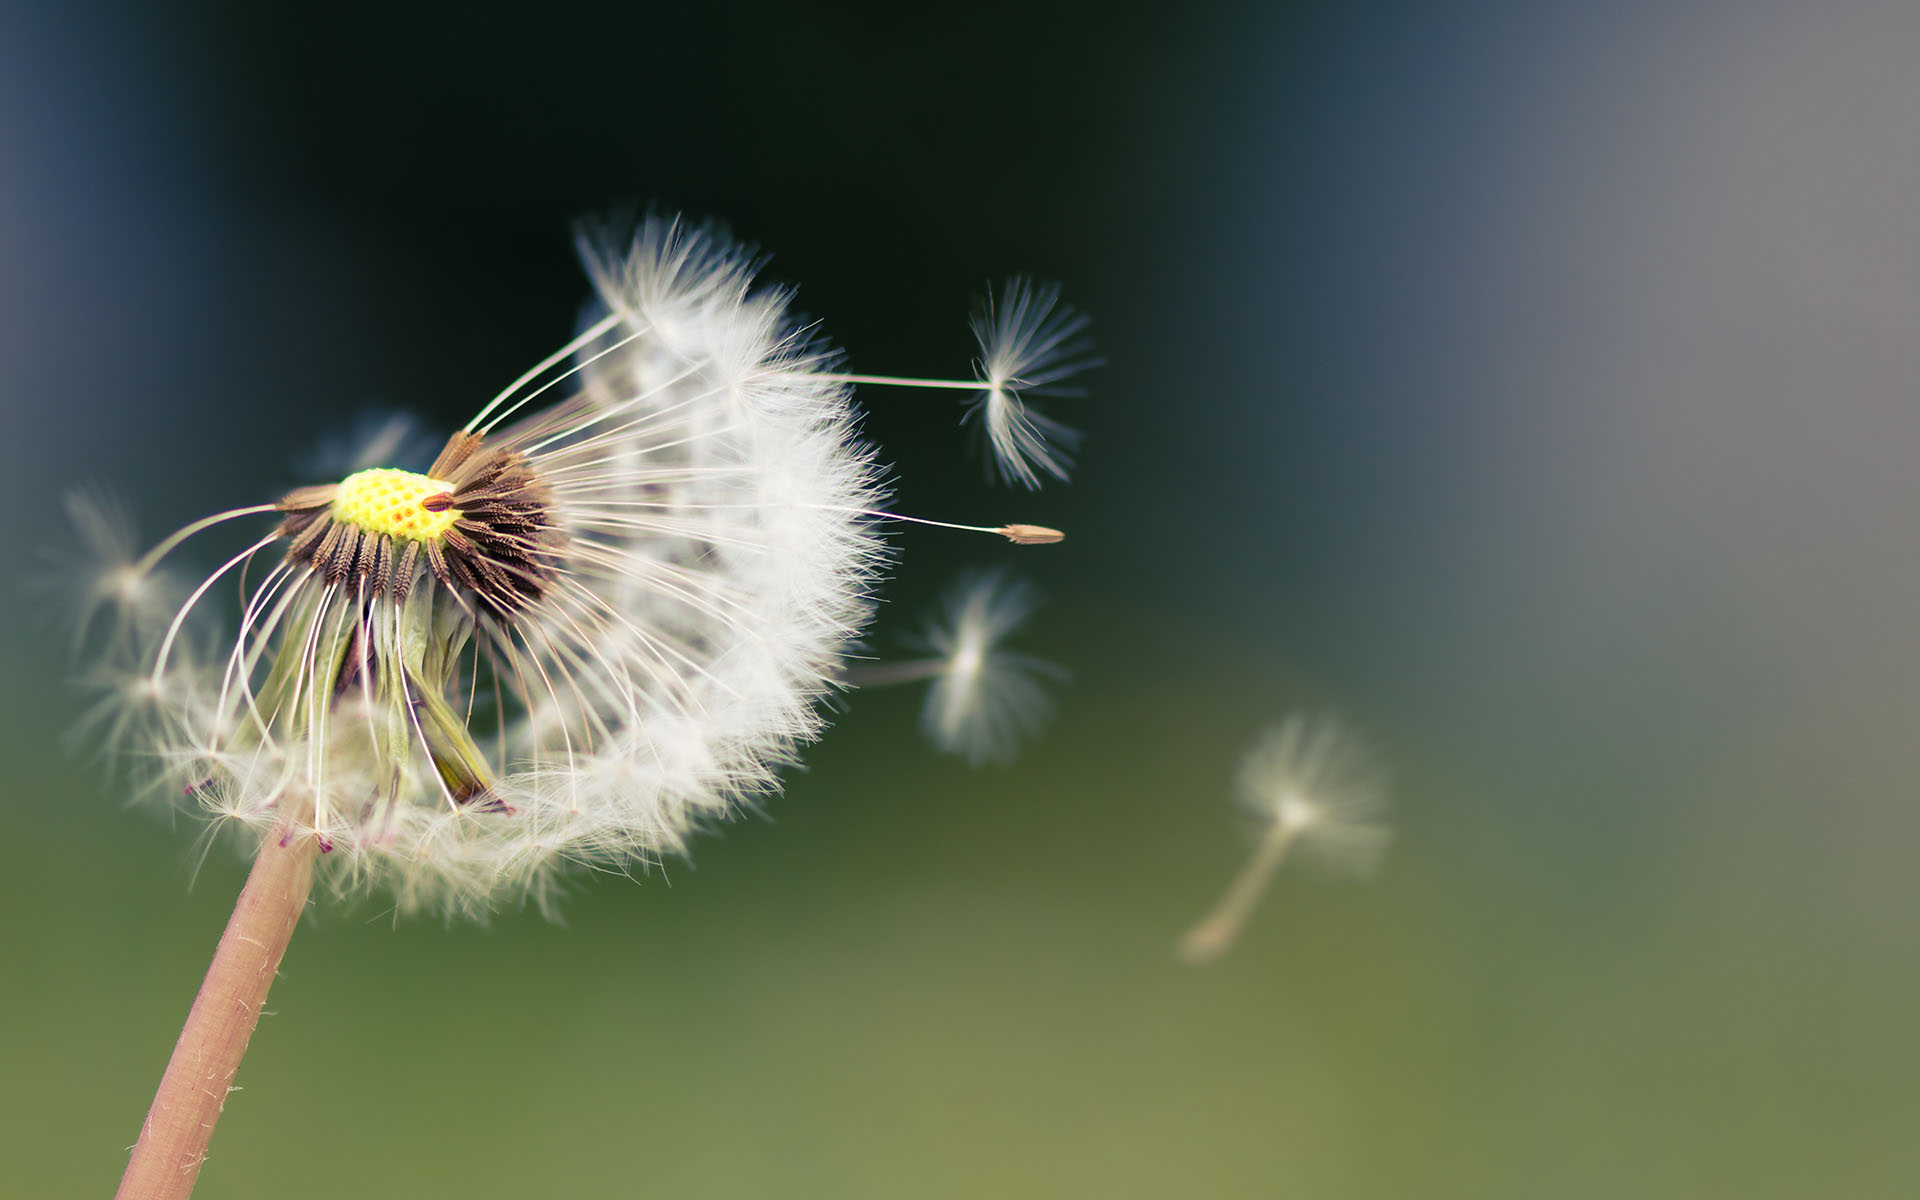 A Guided Meditation to Help You Let Go and Accept Change - A photo of a dandelion blowing seeds into the wind